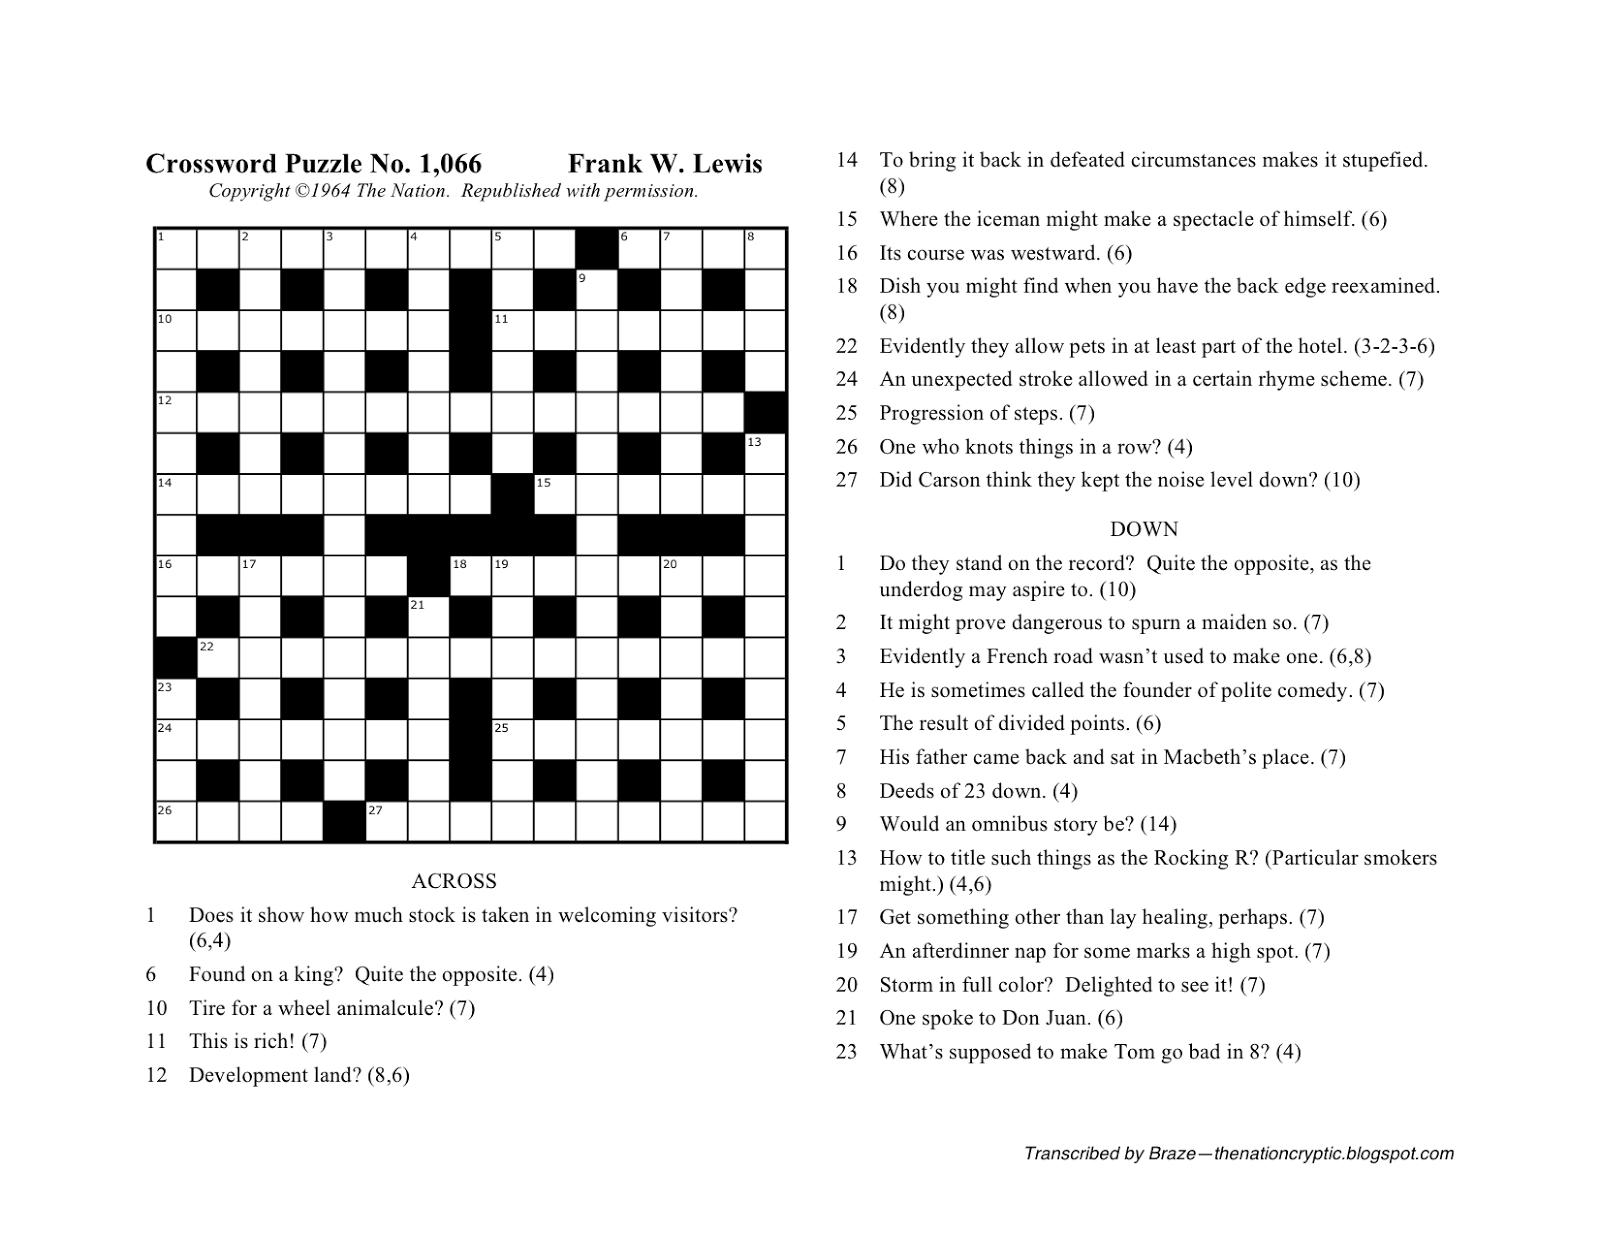 The Nation Cryptic Crossword Forum: Nat Hentoff (Puzzle No. 1,066) - Printable Wall Street Journal Crossword Puzzle